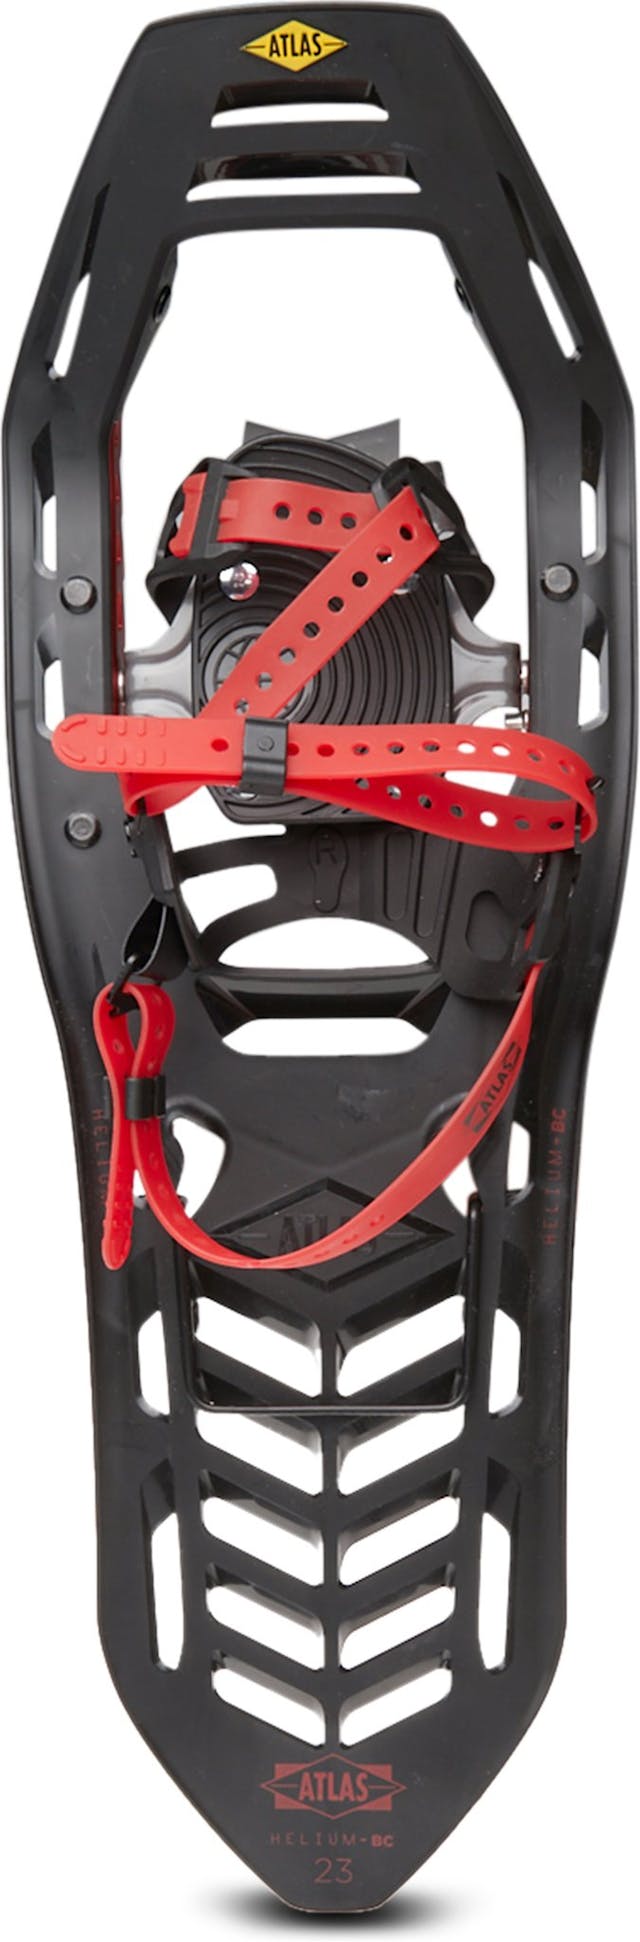 Product image for Helium Backcountry 23 inches Snowshoes - Unisex